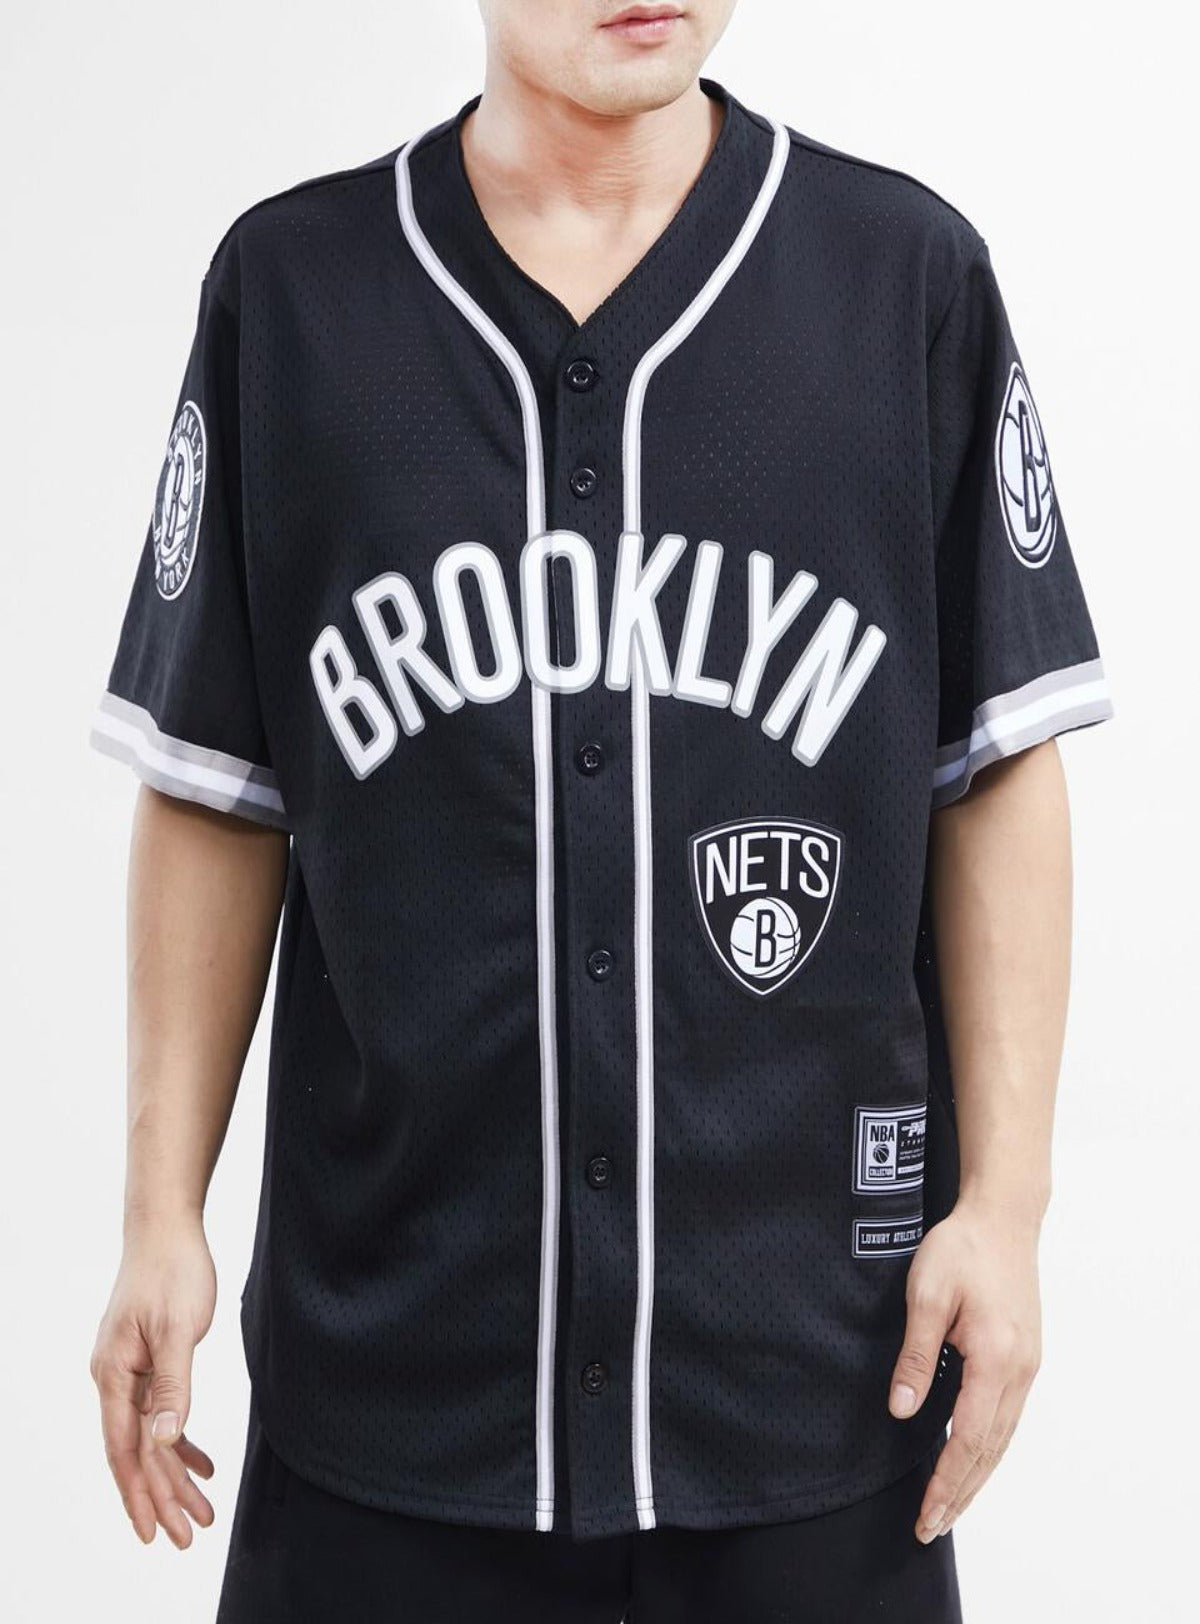 Jerome Jordan Brooklyn Nets Practice-Used #9 Black and White and Rev Jersey  from the 2014-15 NBA Season - Size 3XL